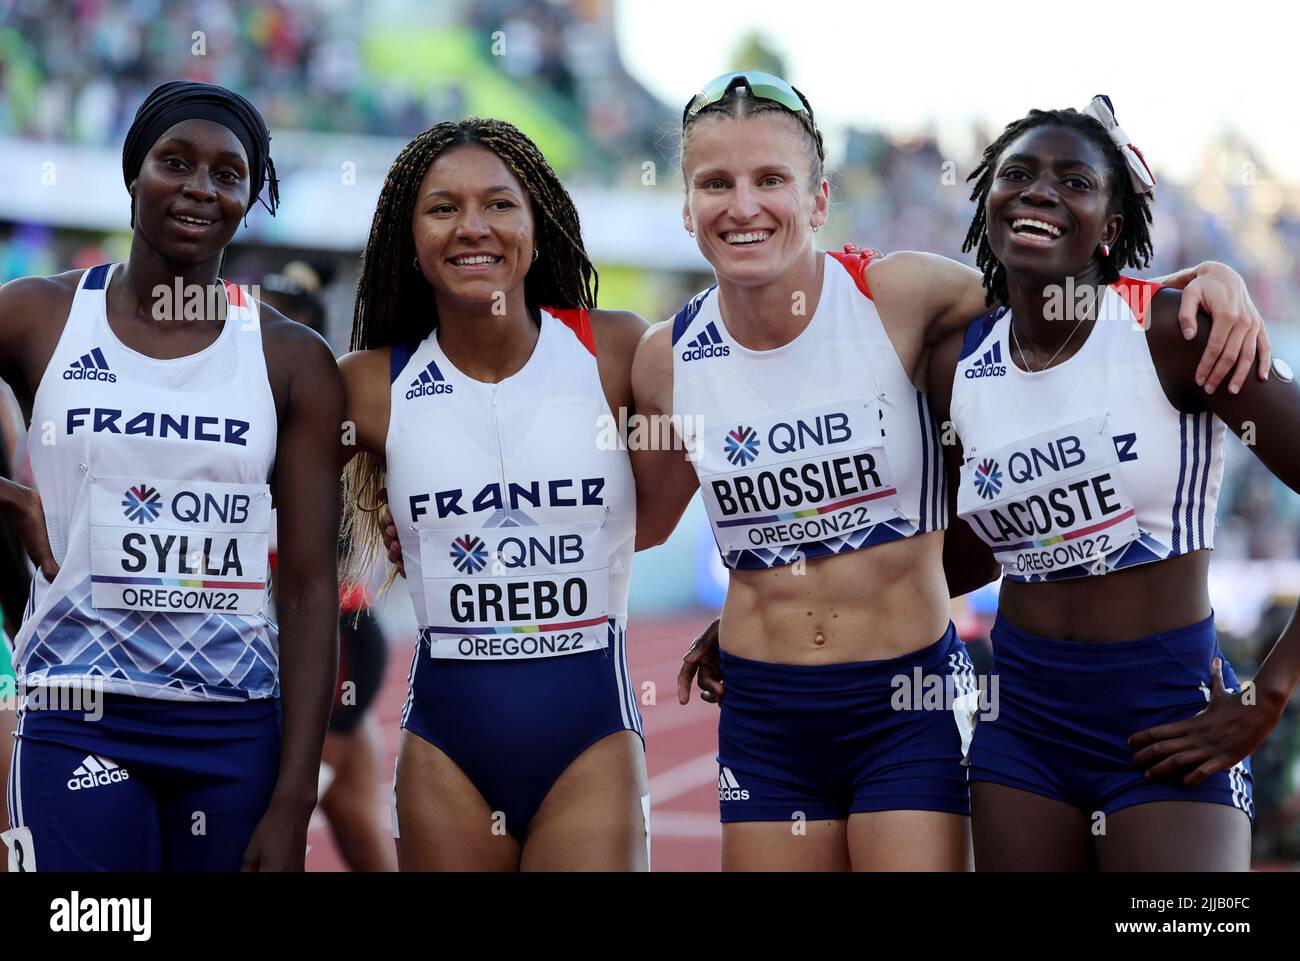 Athletics - World Athletics Championships - Women's 4x400 Metres Relay - Final - Hayward Field, Eugene, Oregon, U.S. - July 24, 2022 France's Sounkamba Sylla, Shana Grebo, Amandine Brossier and Sokhna Lacoste pose after finishing the women's 4x400 metres final in fifth place REUTERS/Lucy Nicholson Stock Photo